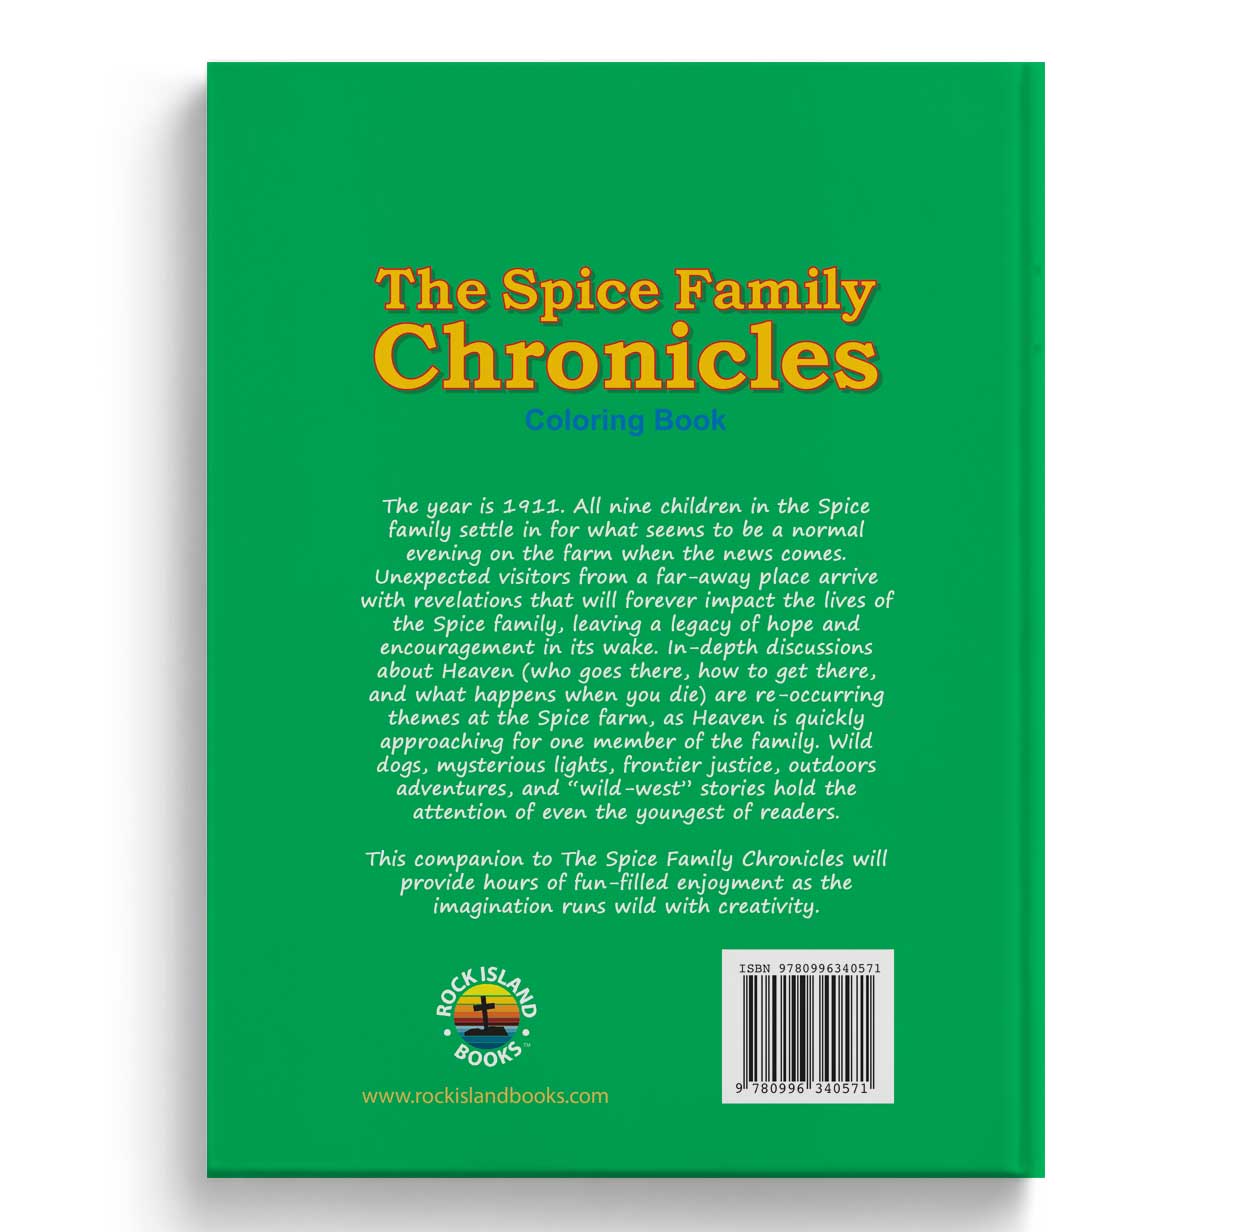 The Spice Family Chronicles: Coloring Book